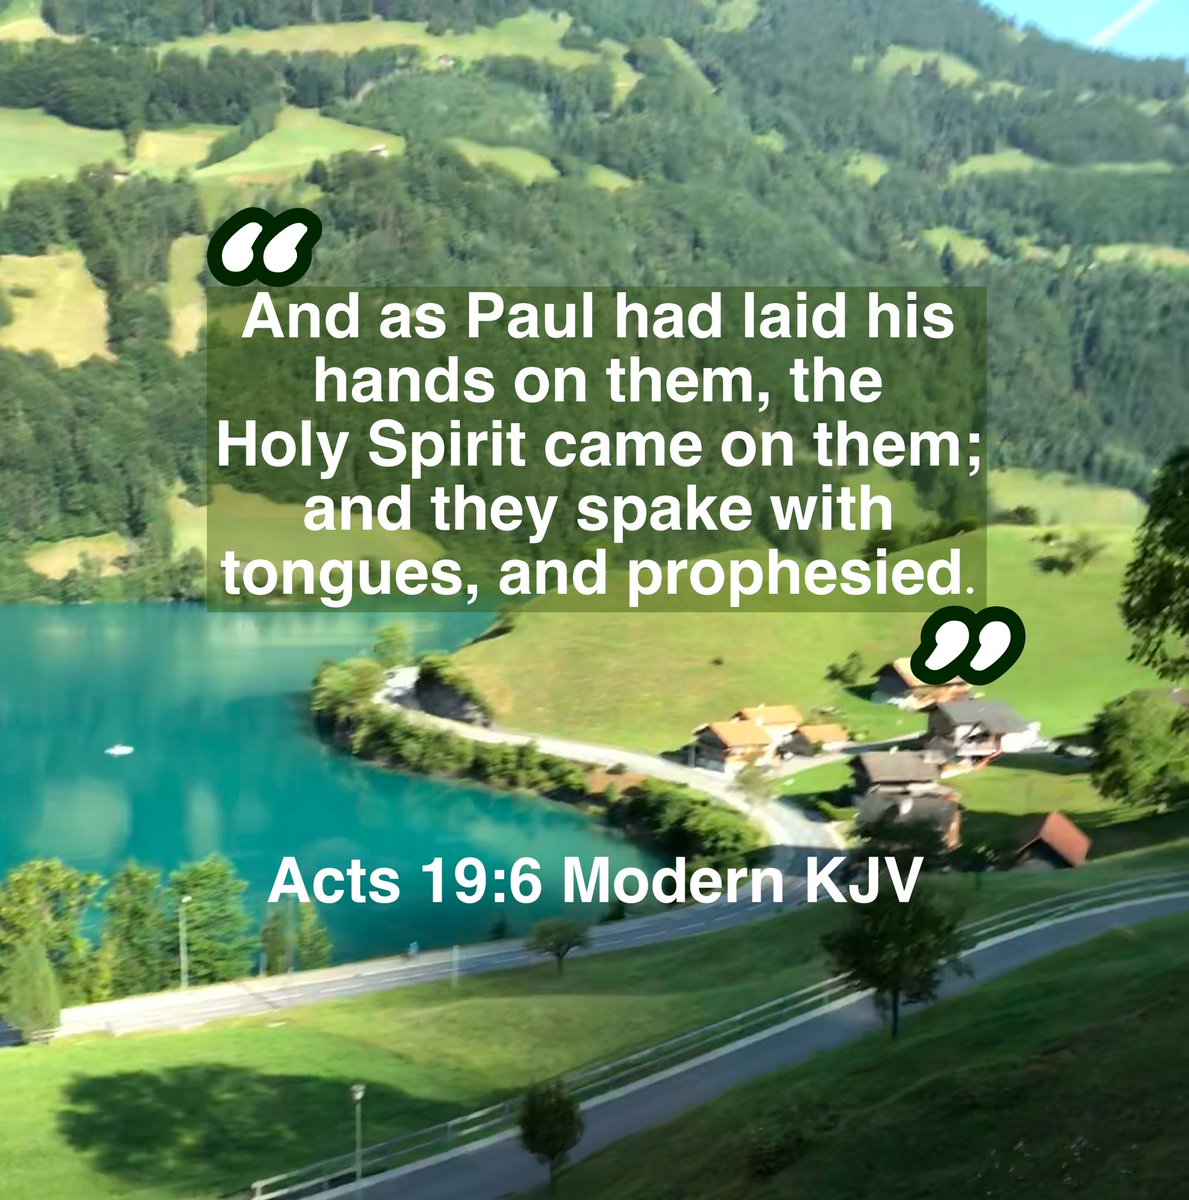 “And hearing, they were baptized in the name of the Lord Jesus.” Acts 19:5 Modern KJV